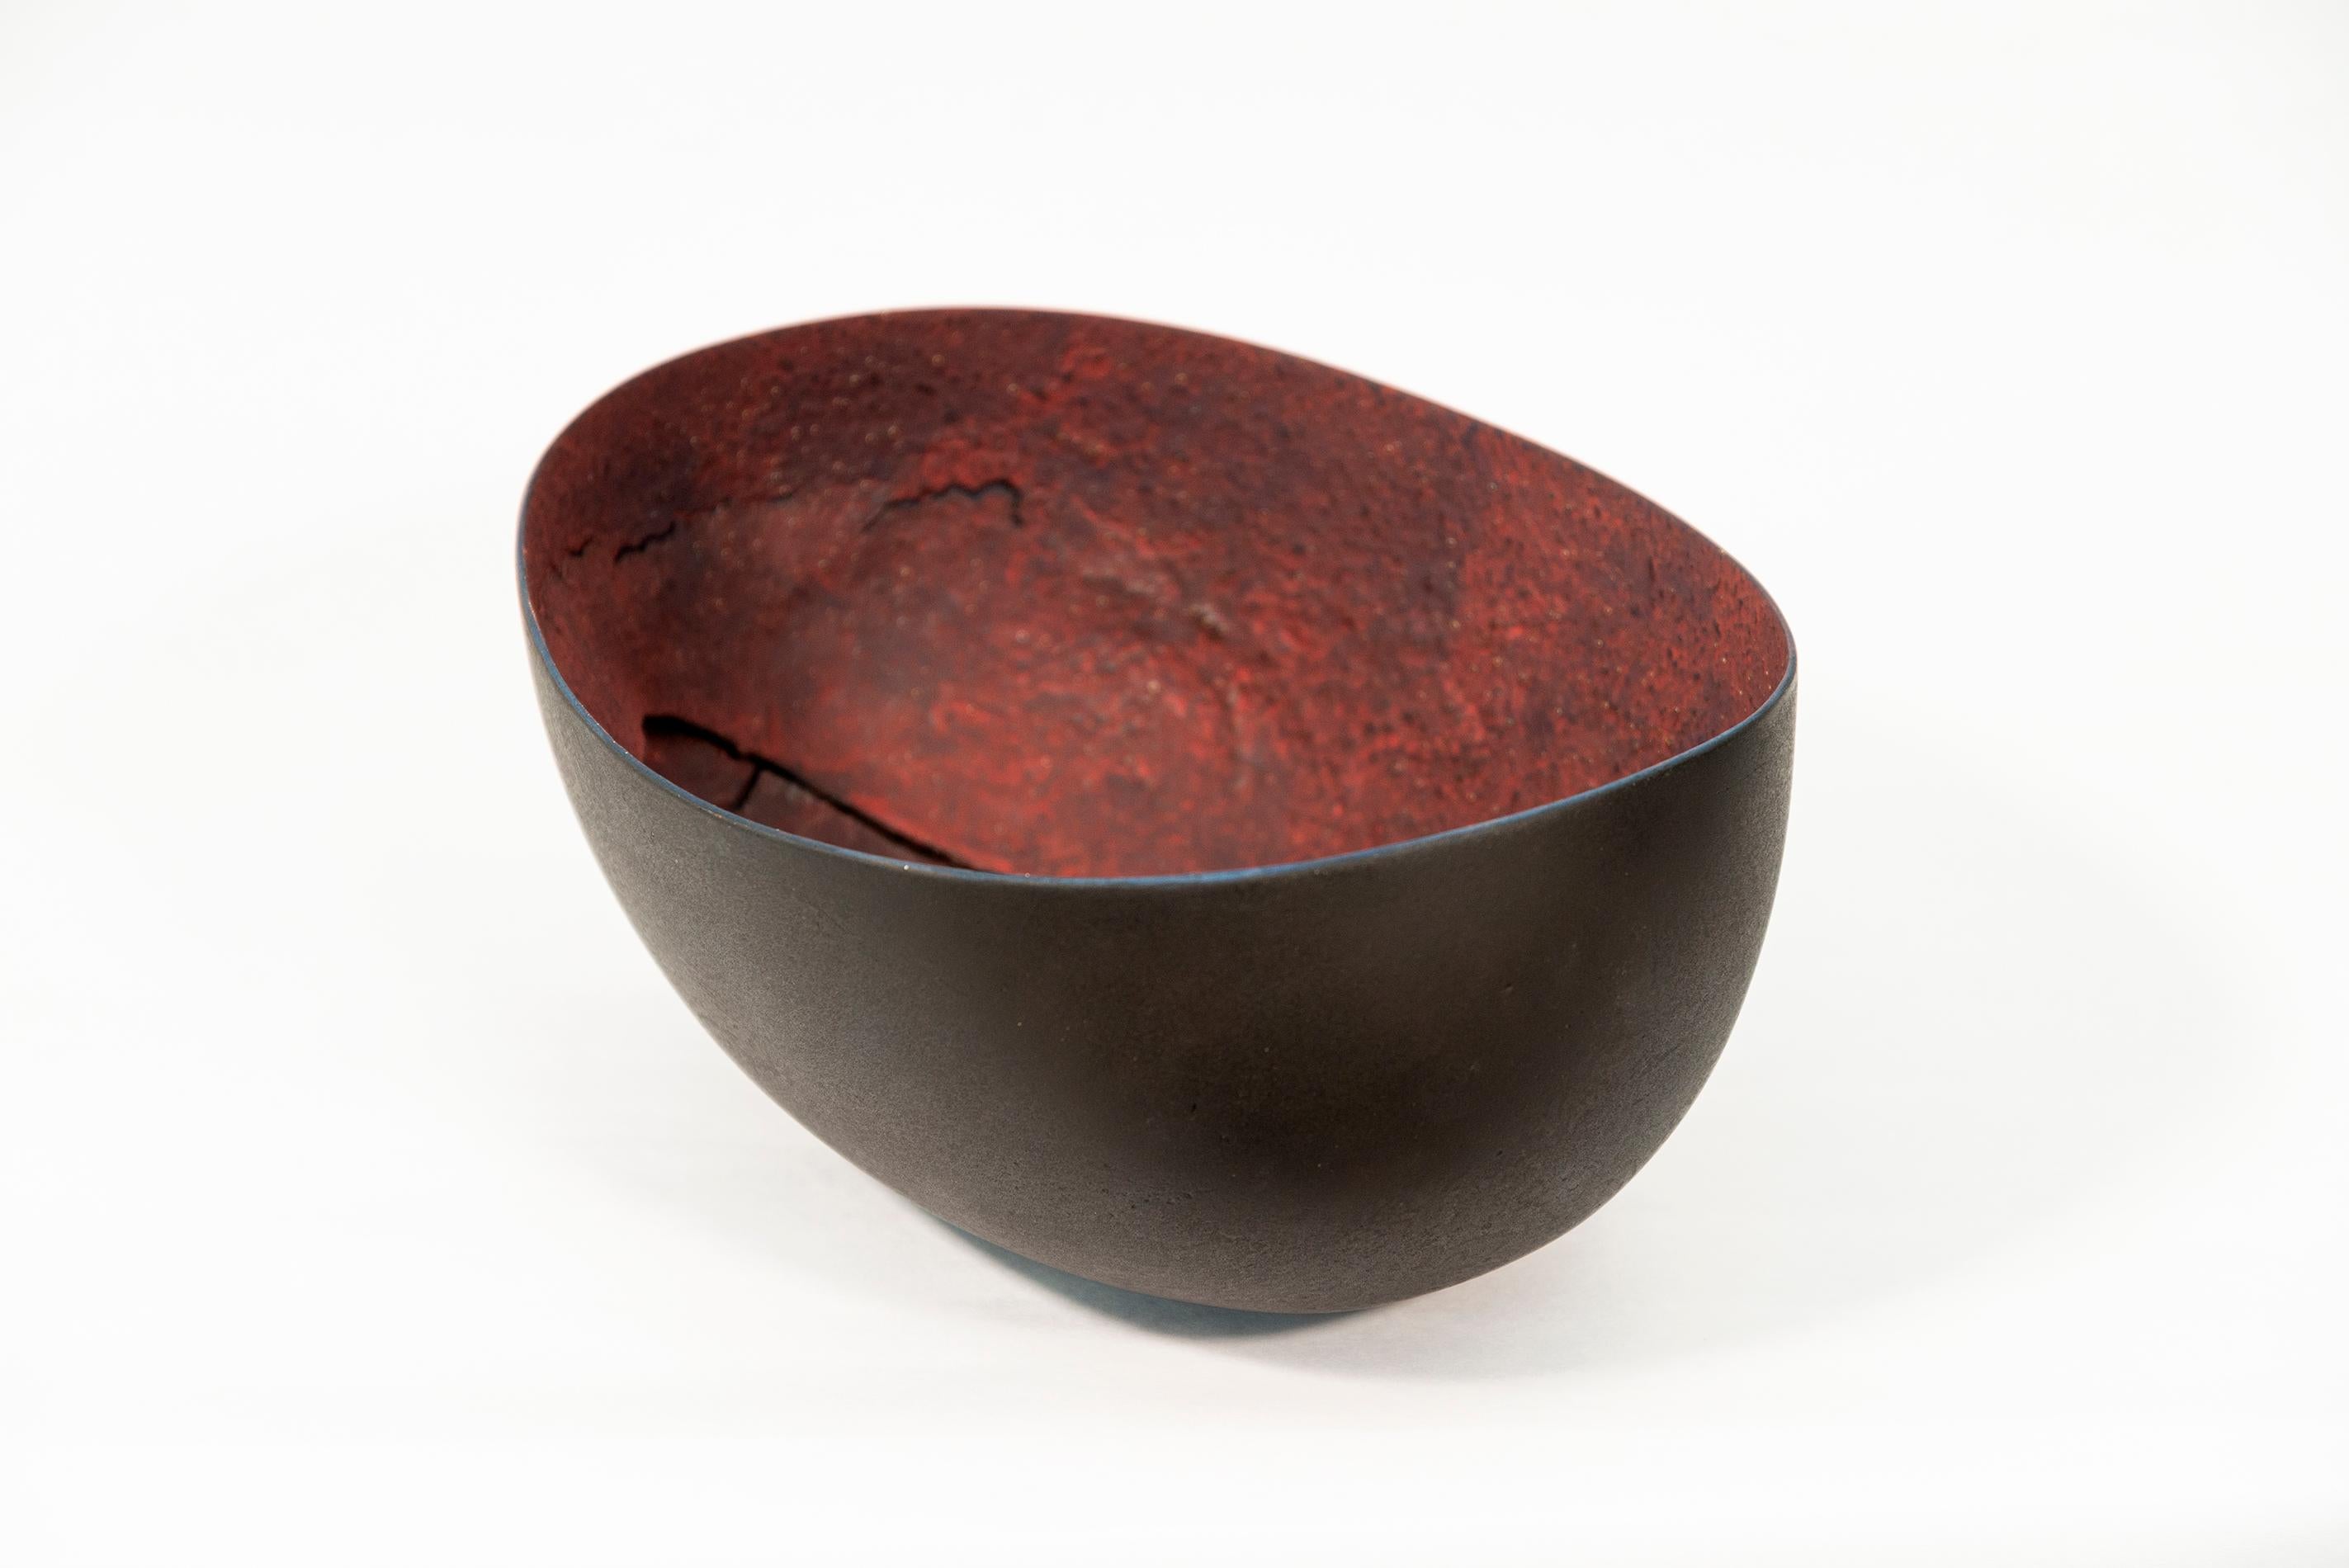 For Canadian ceramicist Steven Heinemann the humble shape of a bowl is an endless source of inspiration. One of a series of vessels, hand formed in clay, the organic oval shape of ‘Untitled’ is informed by nature. The black, smooth finish on the